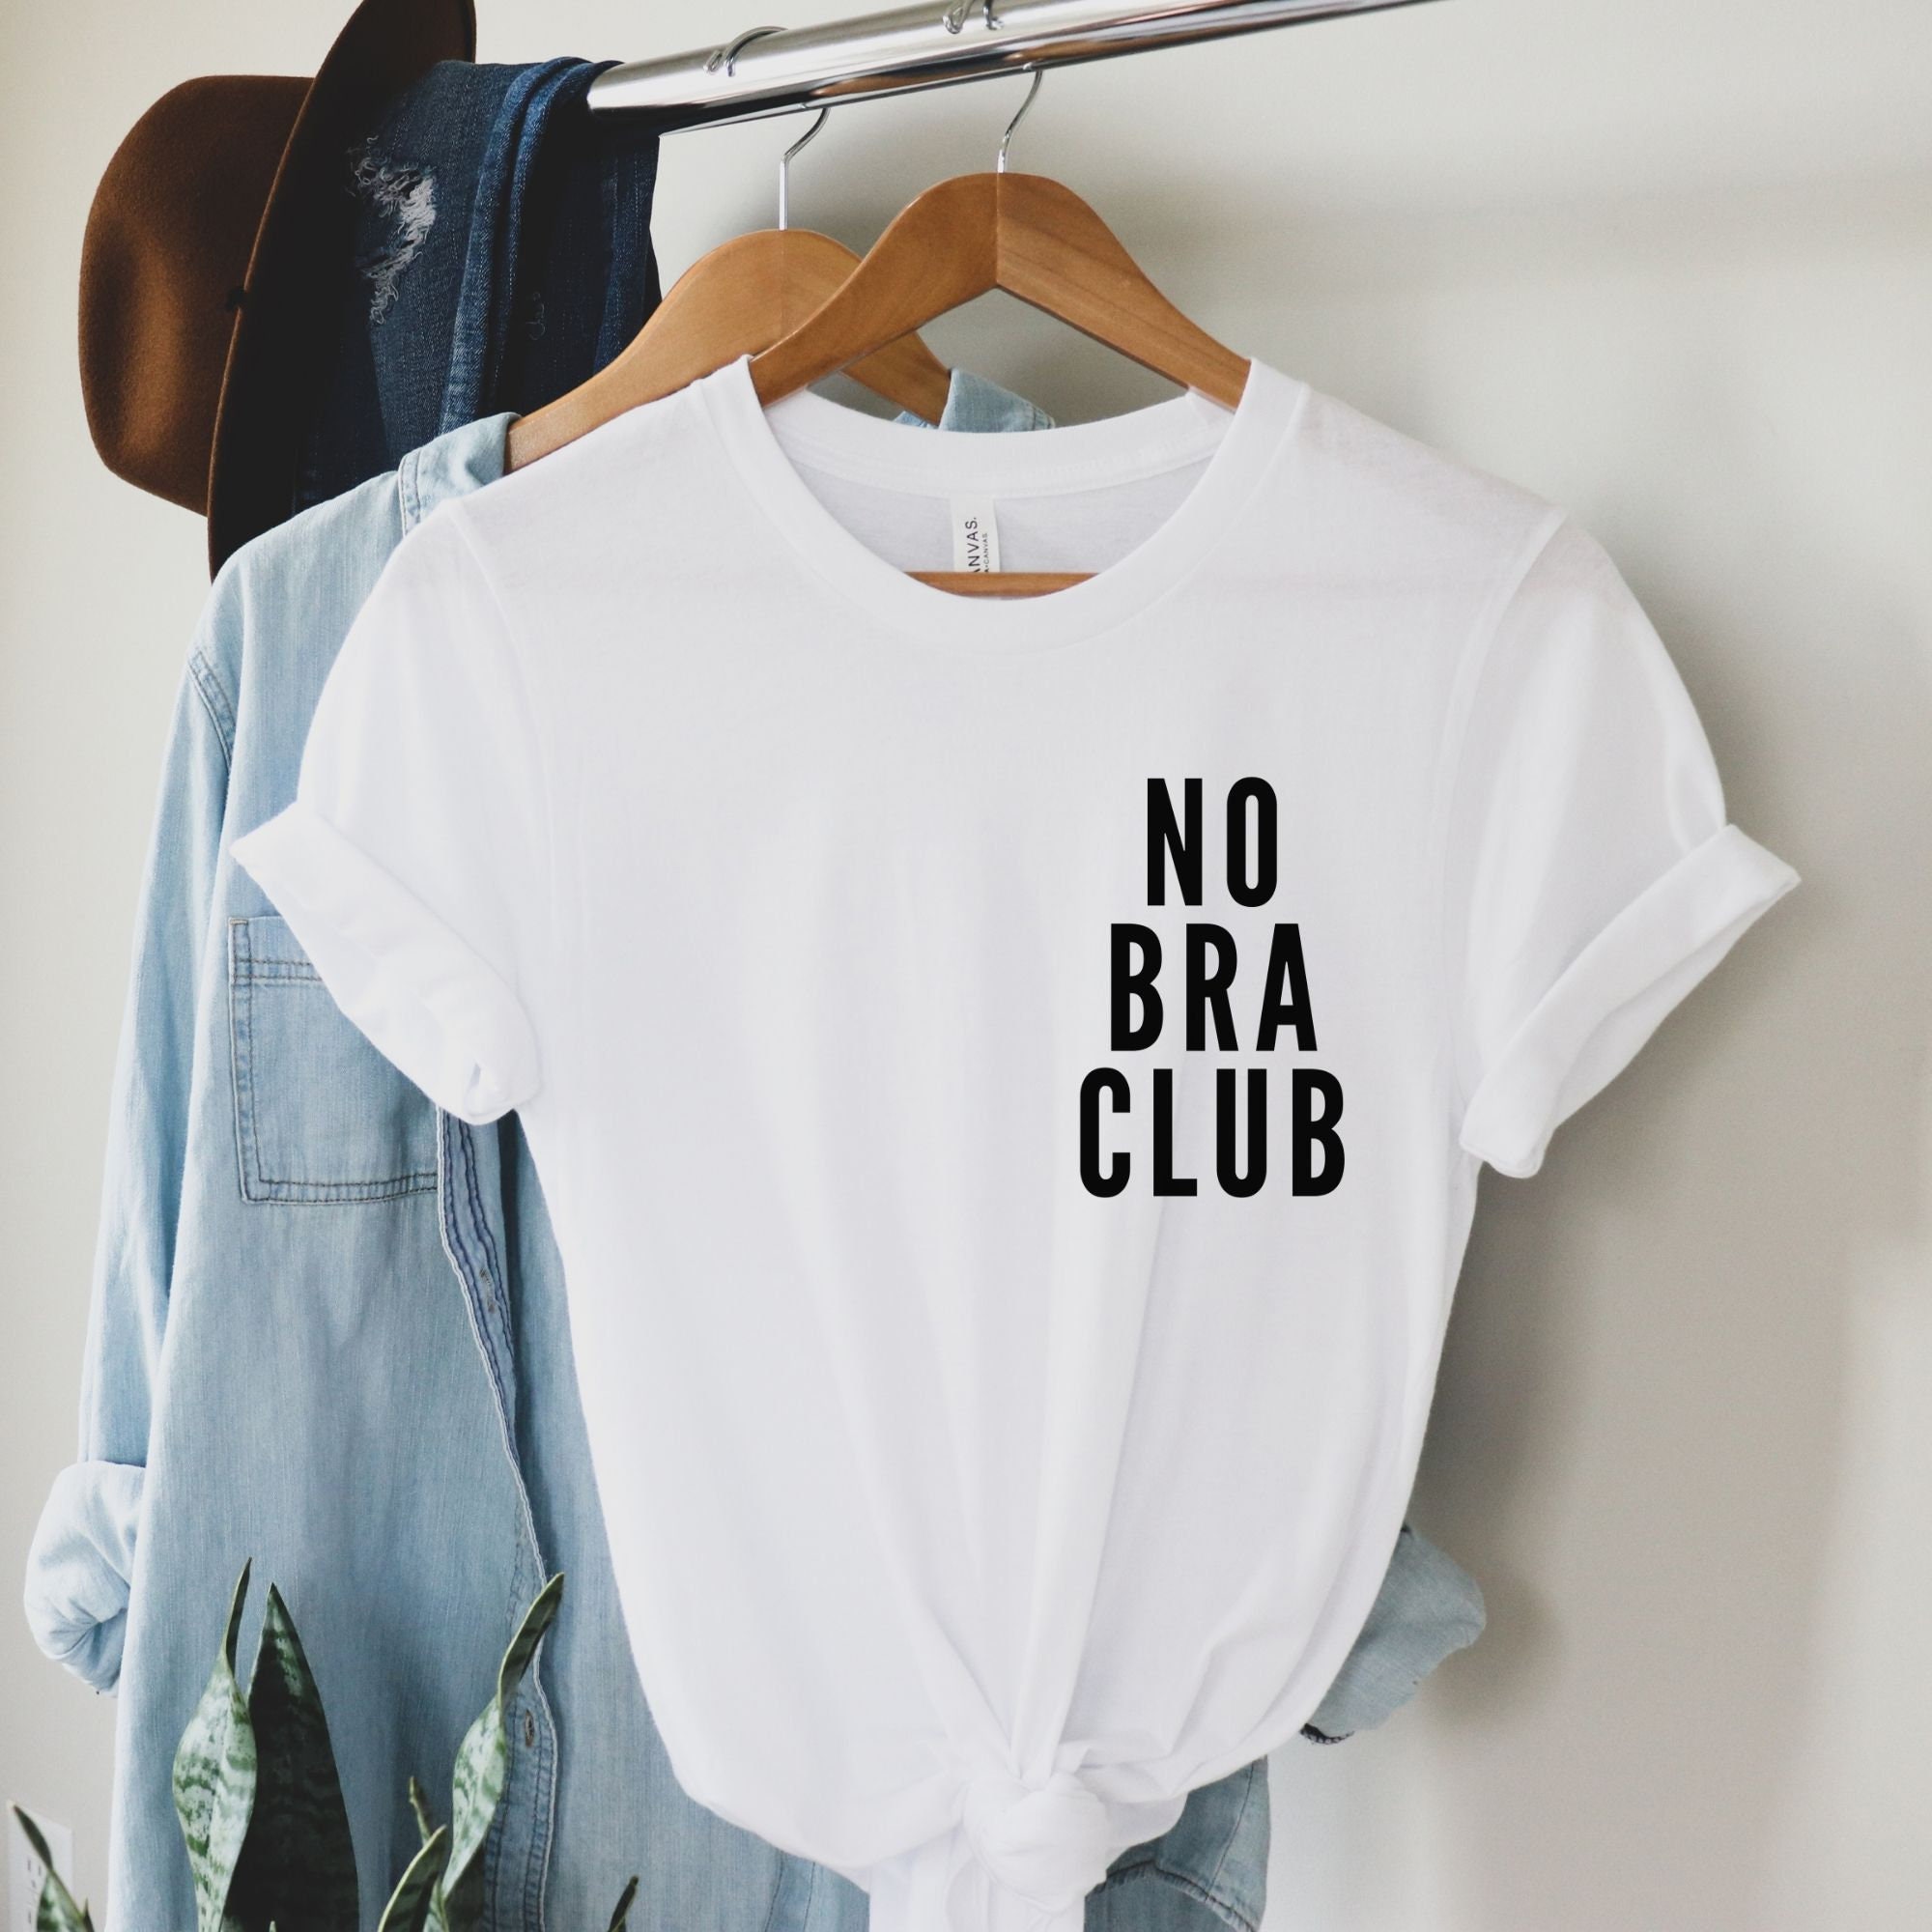 If It Requires Wearing a Bra, I'm Not Going, Women's T-shirt, Fun Shirt, No  Bra, Graphic Tee, Gifts for Her, Unisex Tee, Mother 